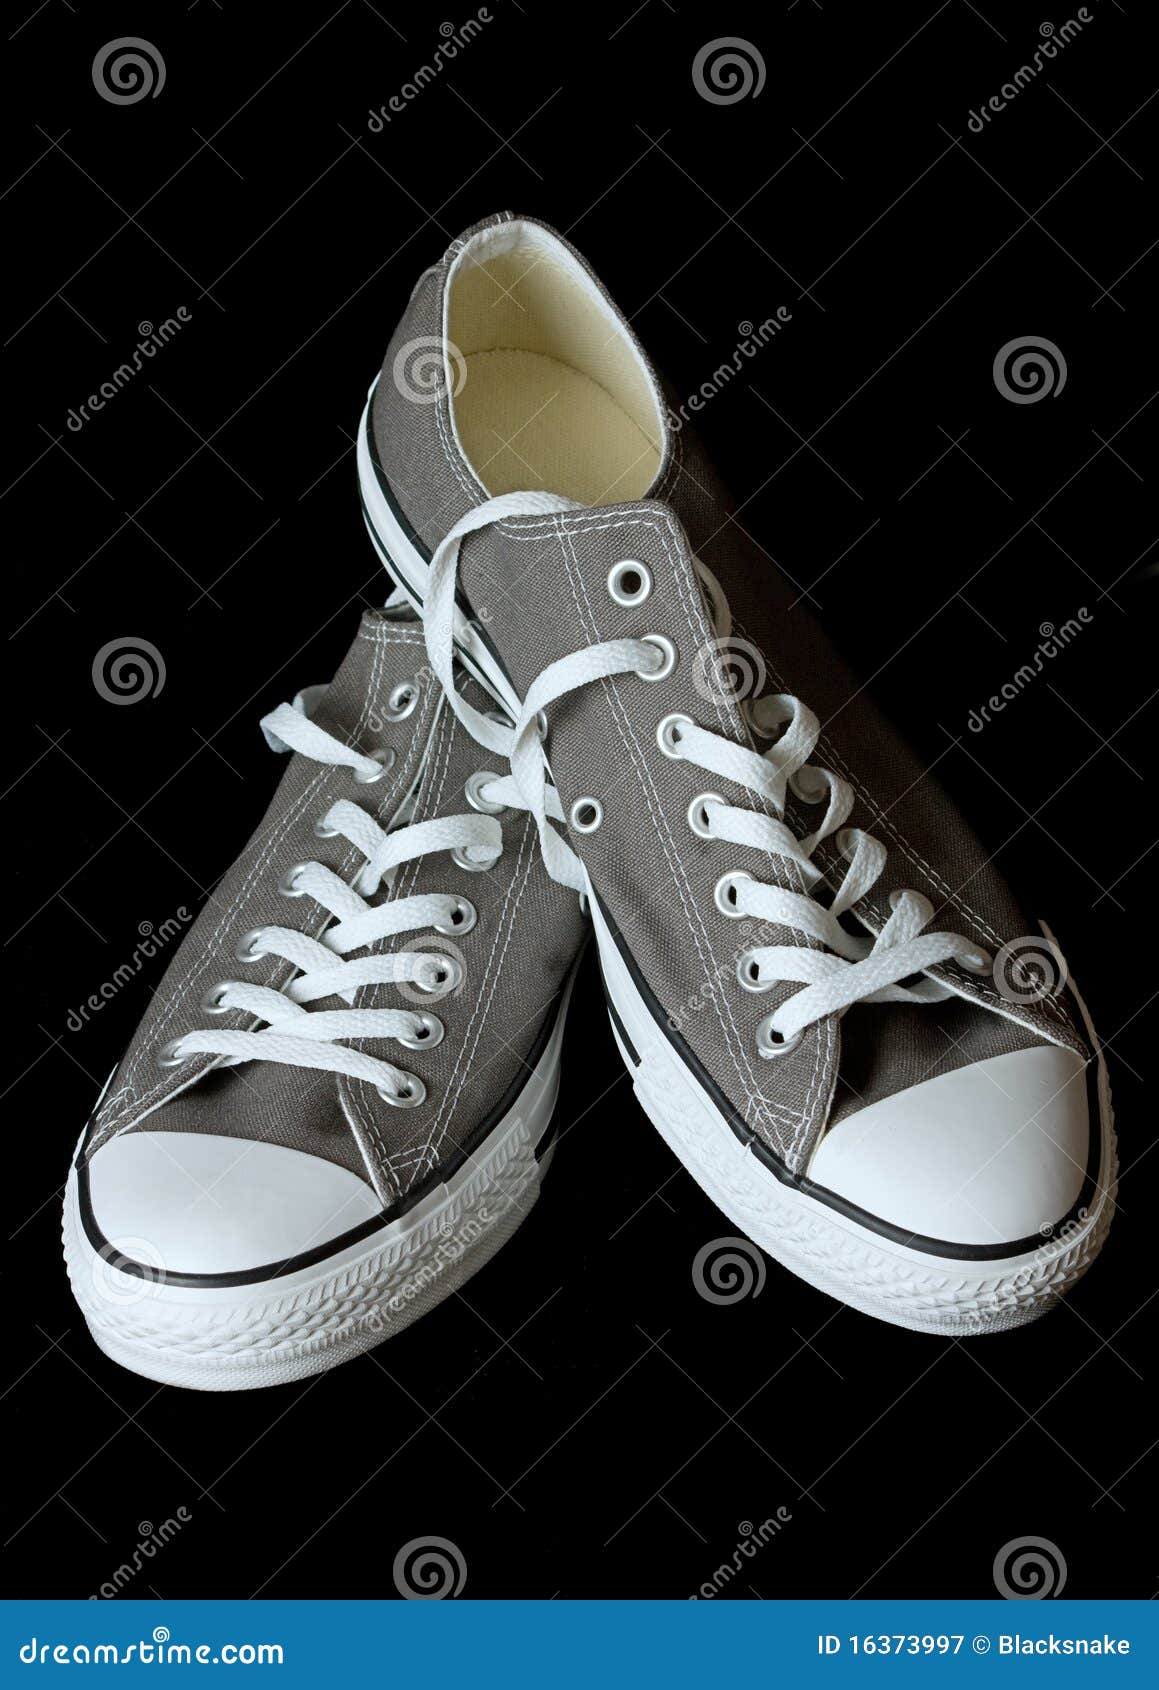 Gray Sneakers Youth Footwear at Black Background Stock Image - Image of ...